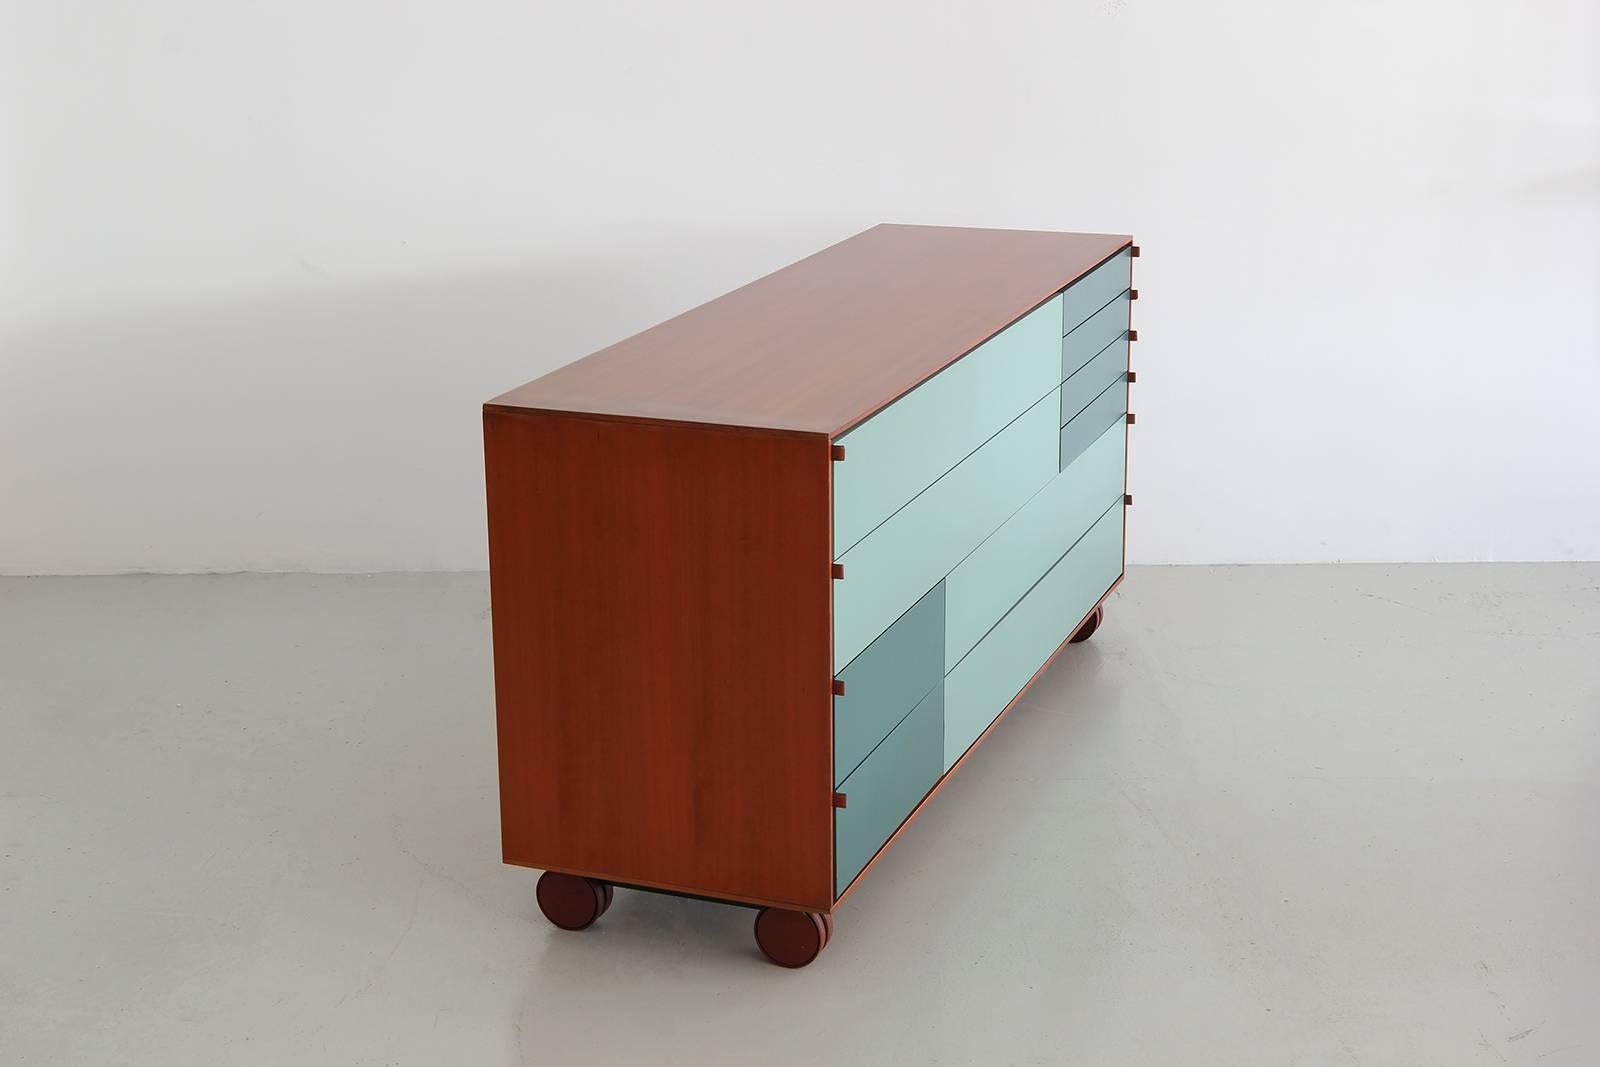 Walnut wrapped chest of drawers by B&B Italia. Drawers are geometric patterns of green-blues with leather tab pulls. Piece is an incredible find and a versatile piece.